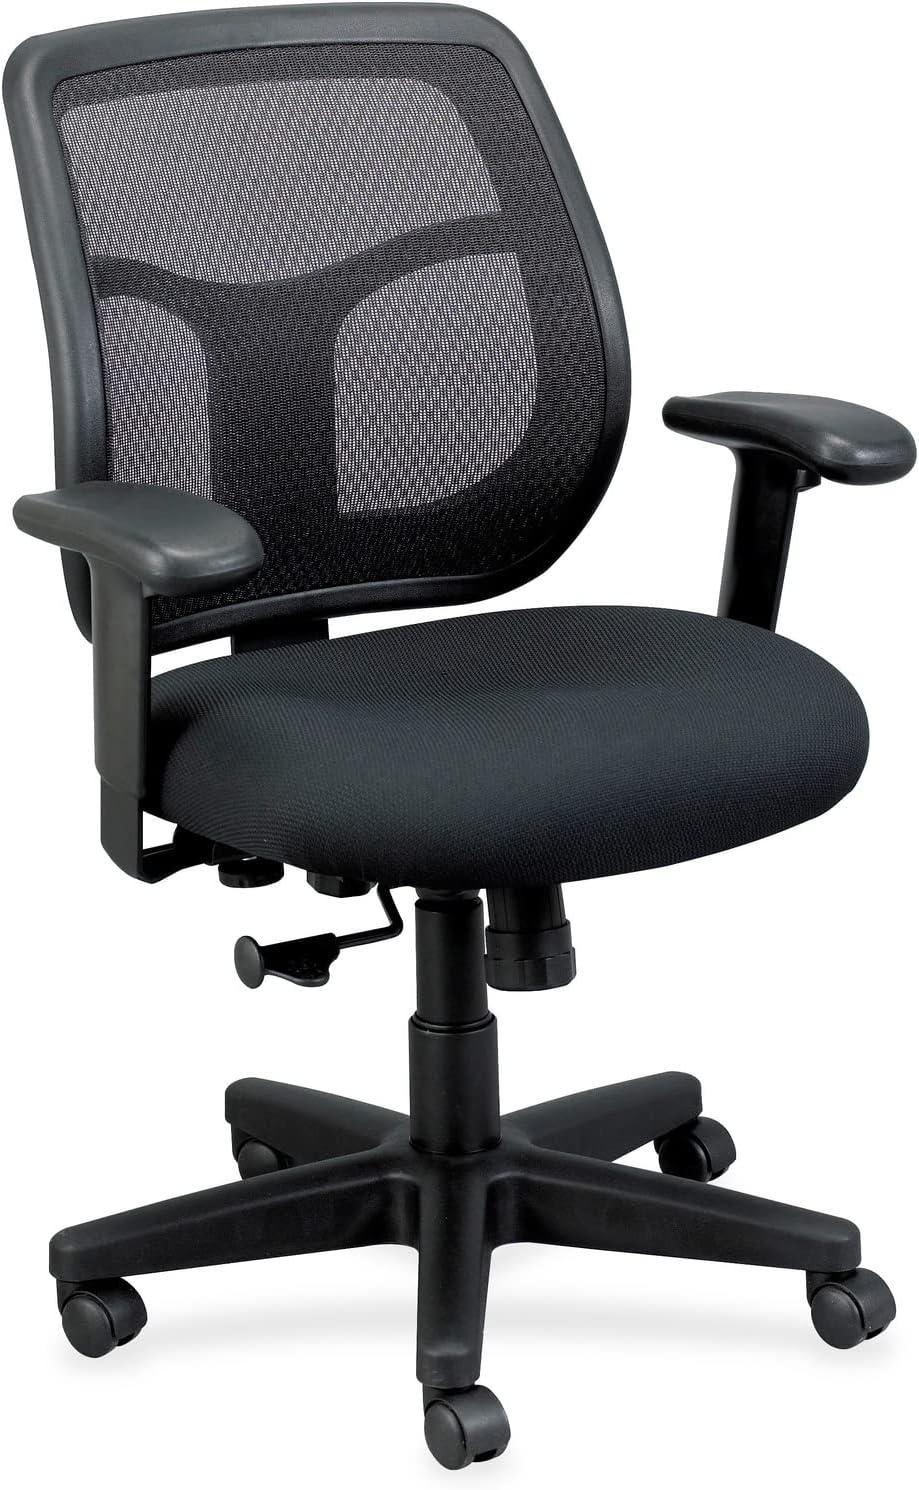 Adjustable Swivel Task Chair with Mesh Back and Black Fabric